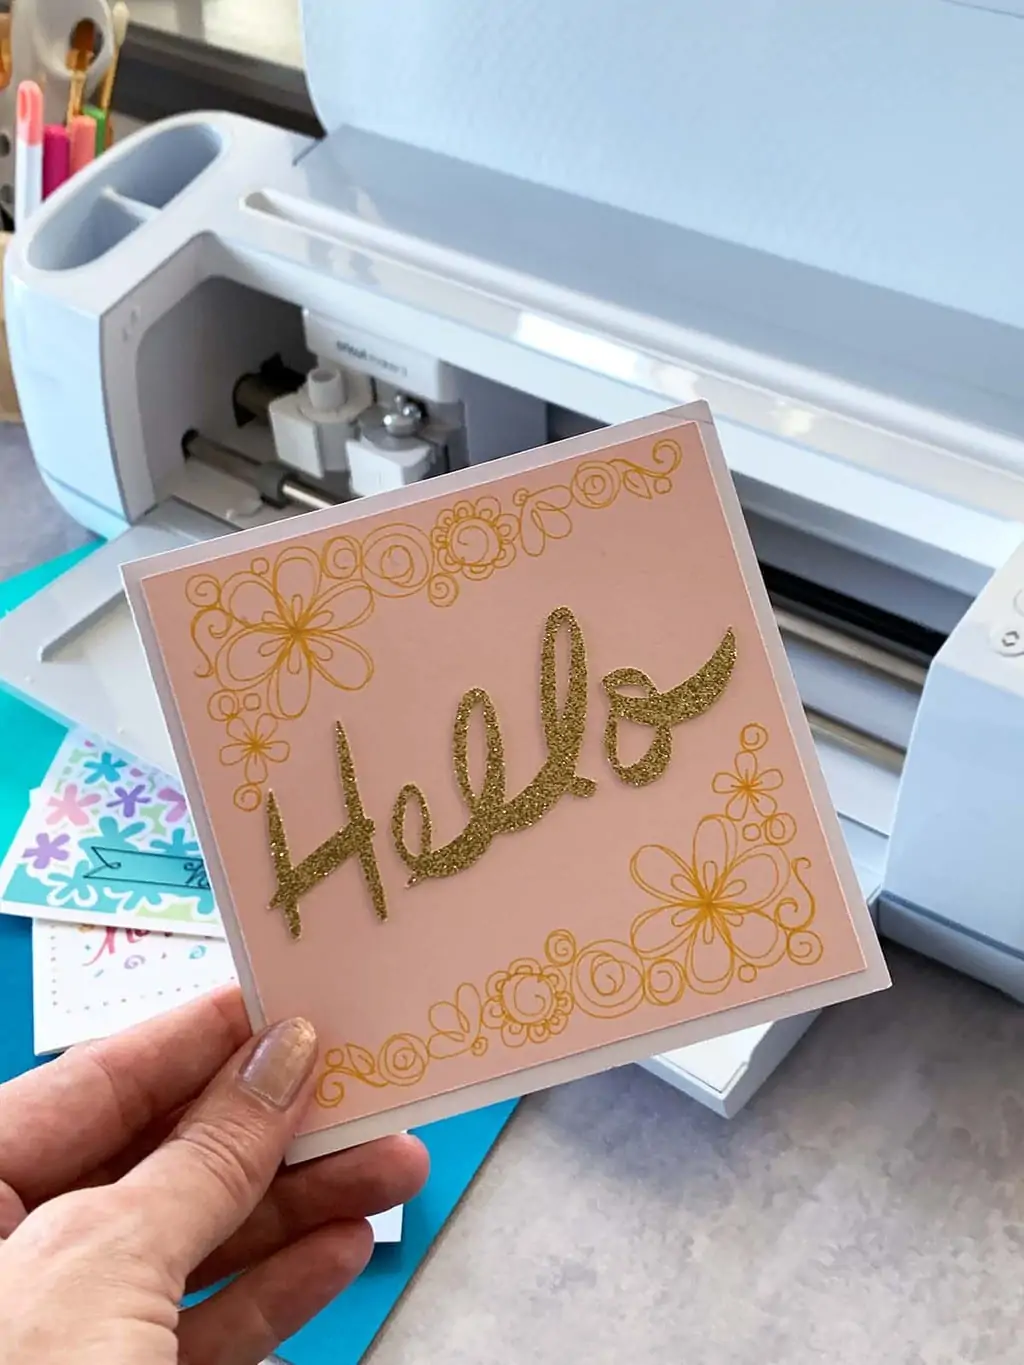 What do you want to make with your Cricut?